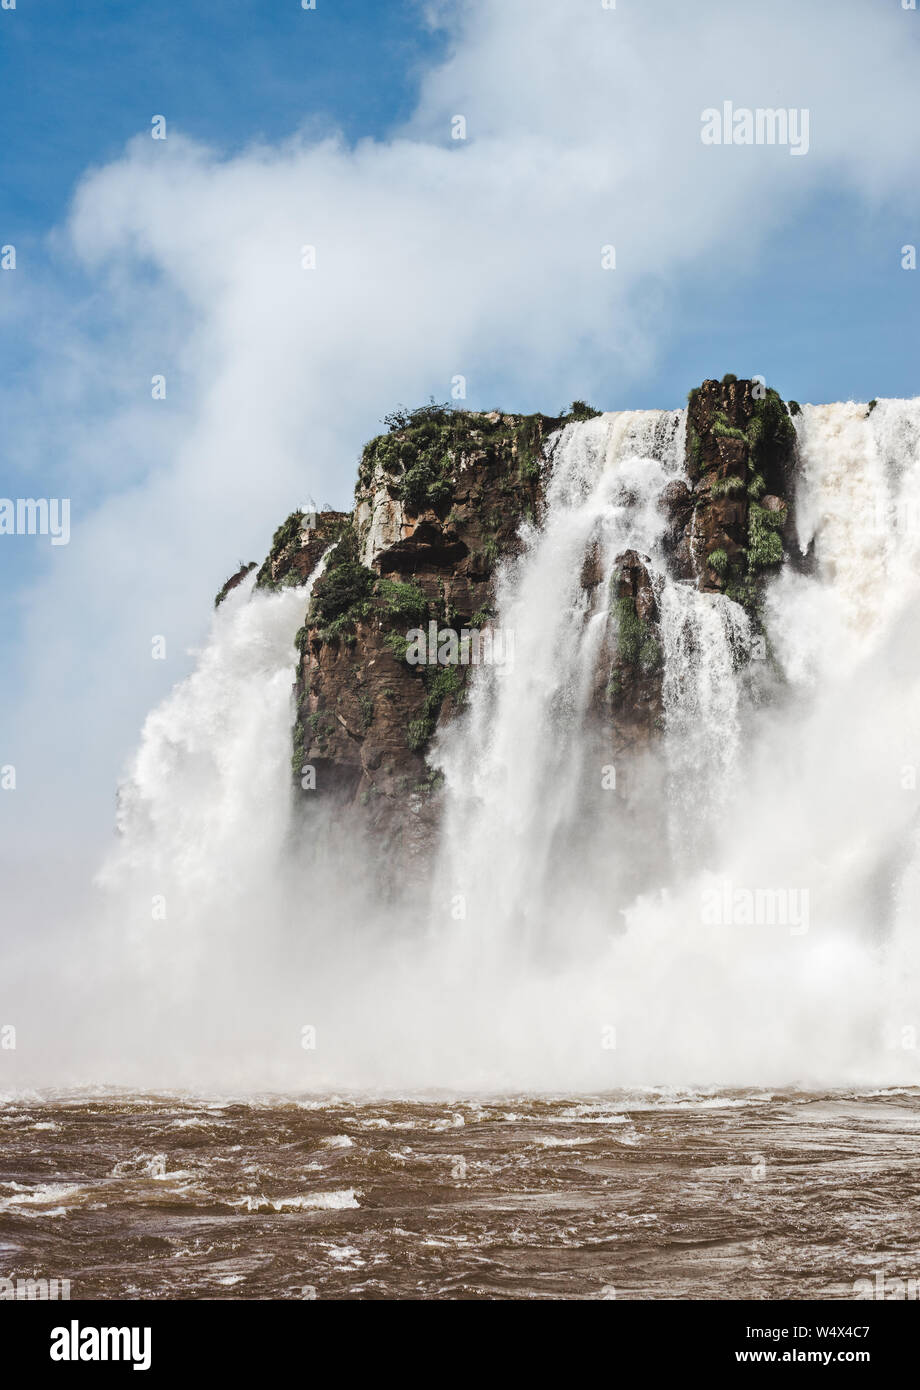 Powerful gushing water of Iguazu Falls, Argentina on a sunny day Stock Photo